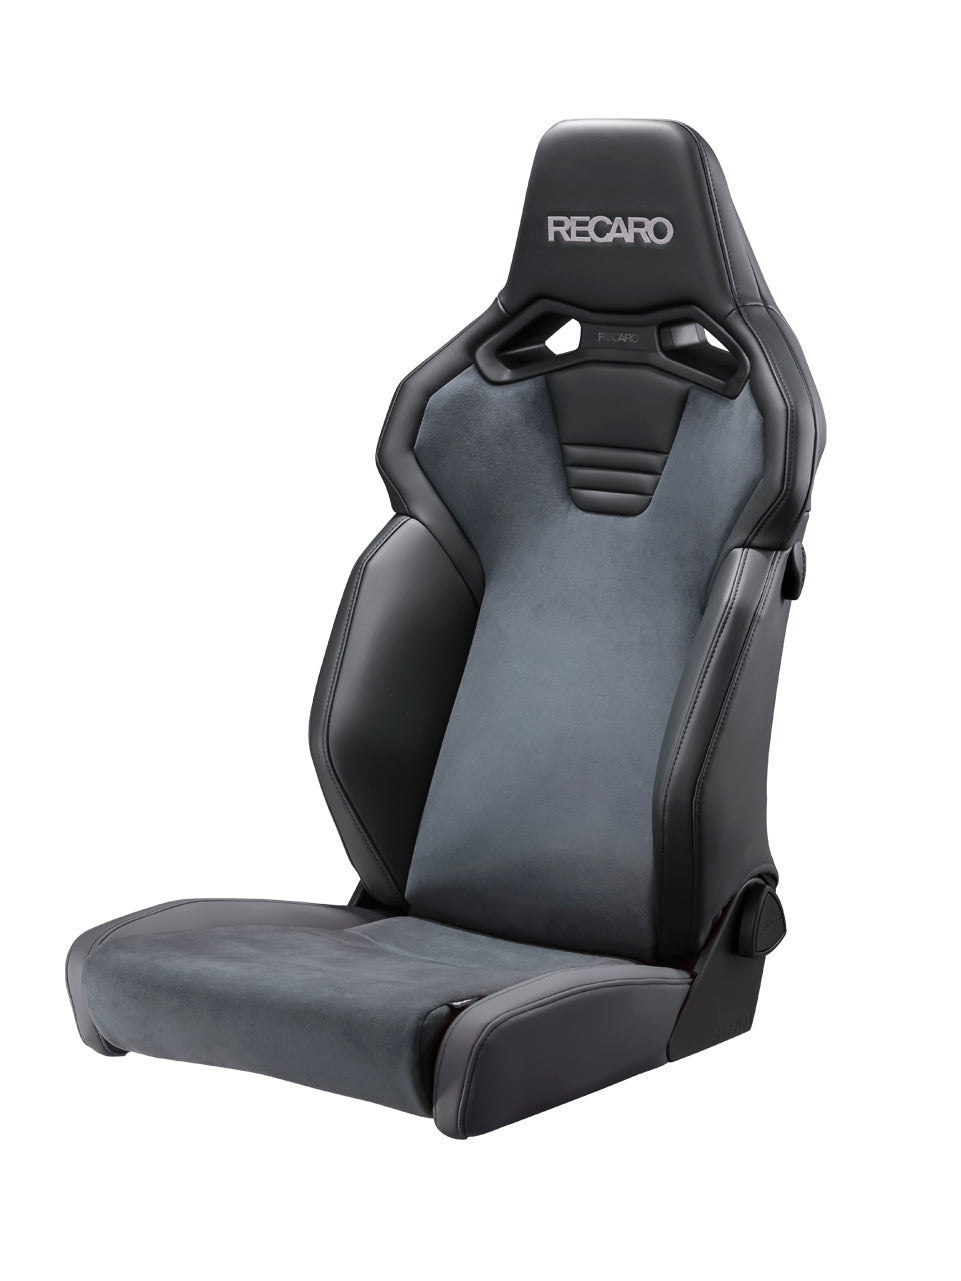 RECARO SR-C UT100H CG BK ARTIFICIAL LEATHER BLACK COLOR AND ULTRA SUEDE CHARCOAL GRAY COLOR WITH HEATED SEATS FOR  81-121.21.645-0